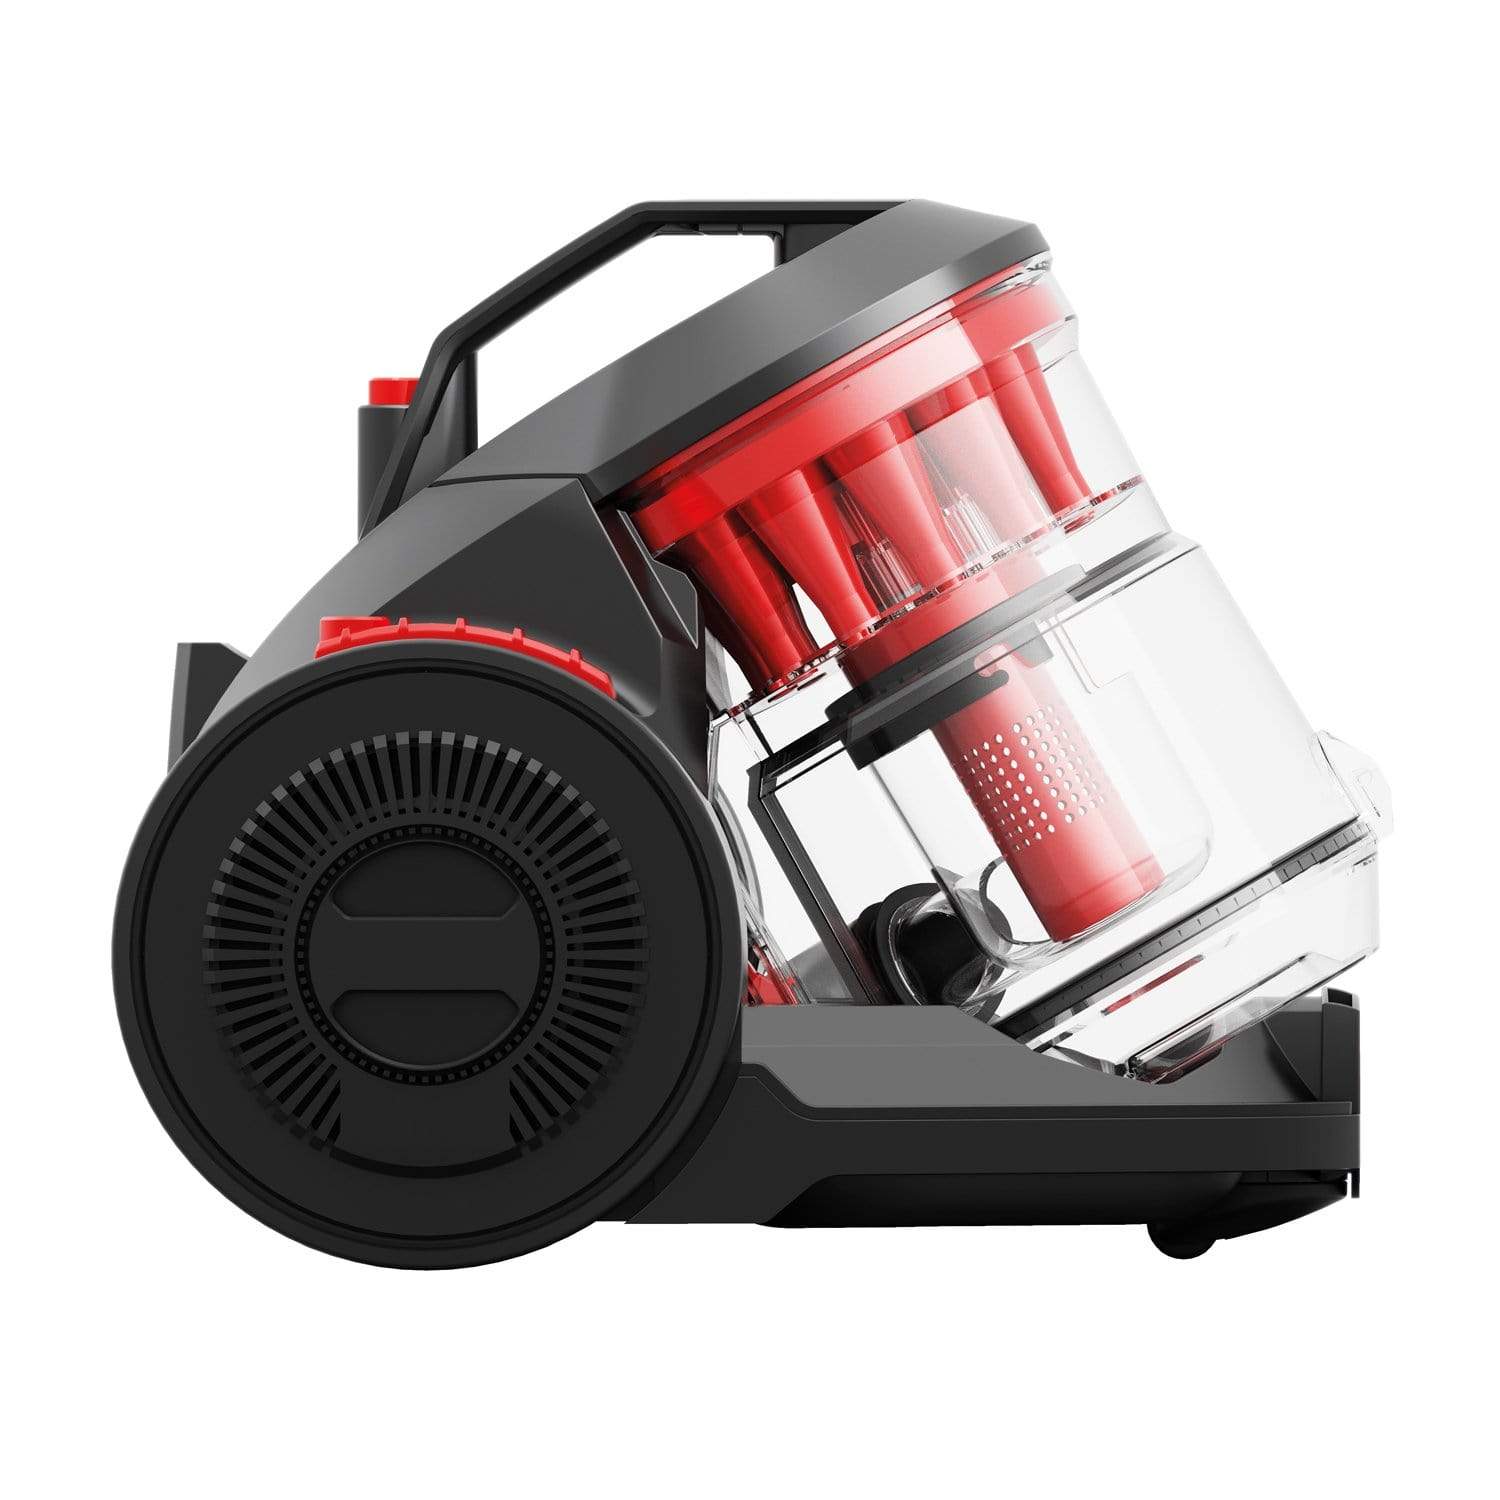 Hoover Air Mini Vacuum Cleaner 850W Grey-Red - Cdcy-Amme